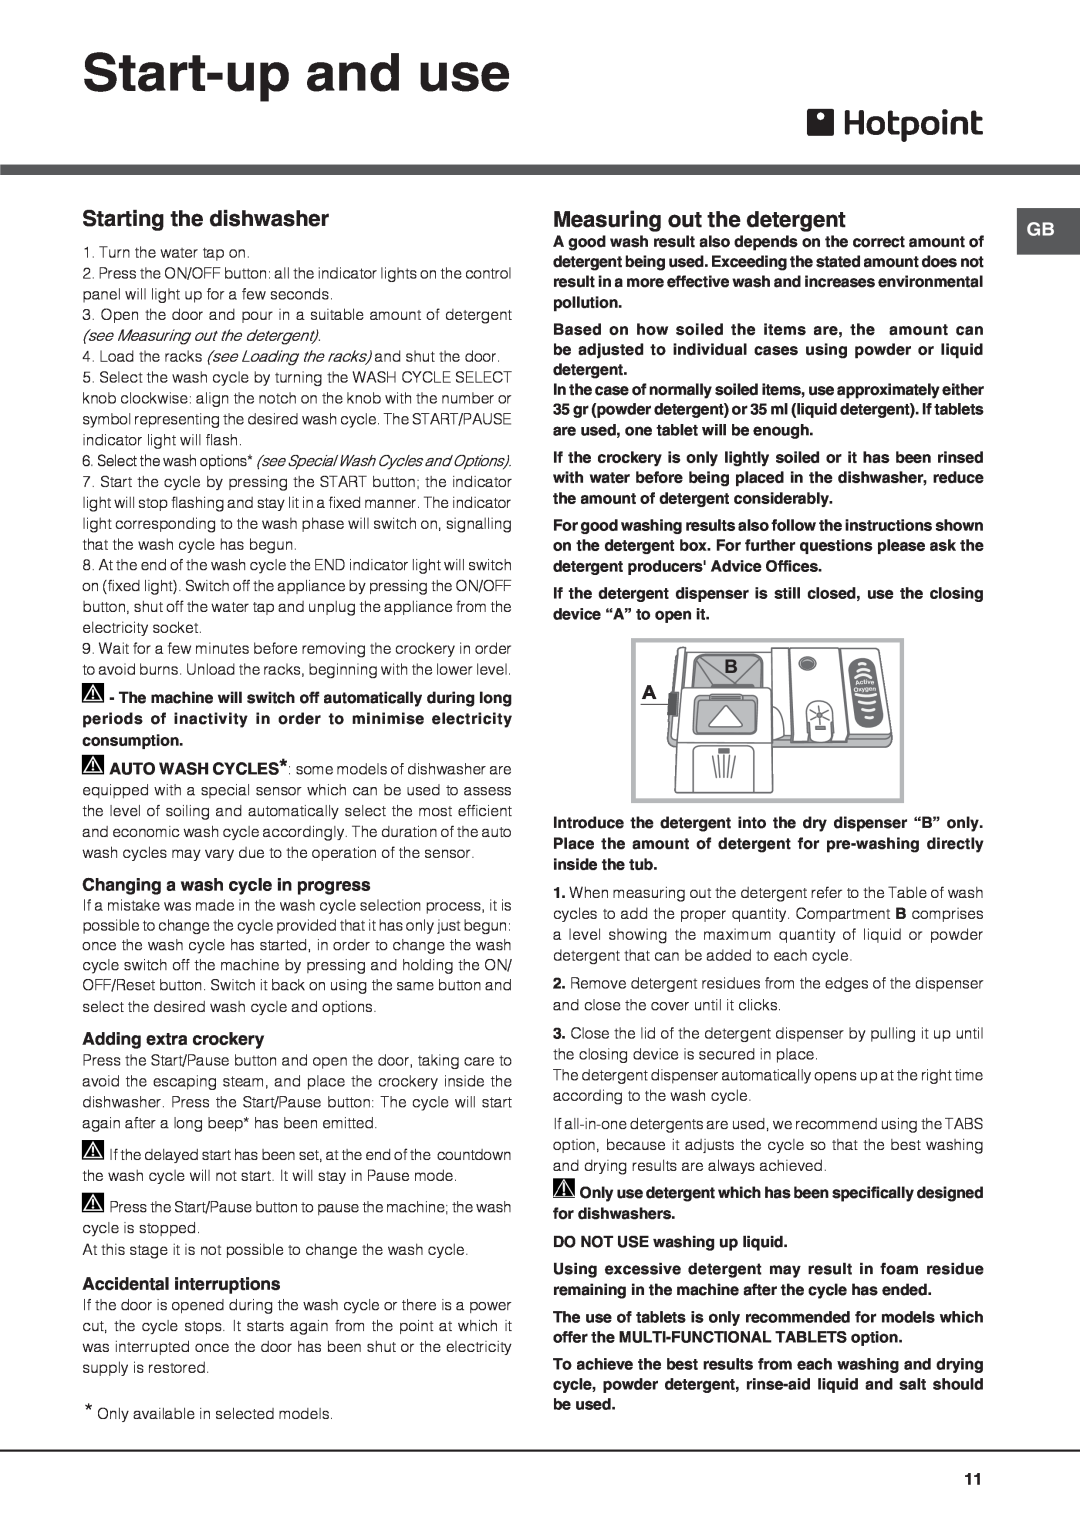 Hotpoint FDFL 11010 Start-upand use, Changing a wash cycle in progress, Adding extra crockery, Accidental interruptions 